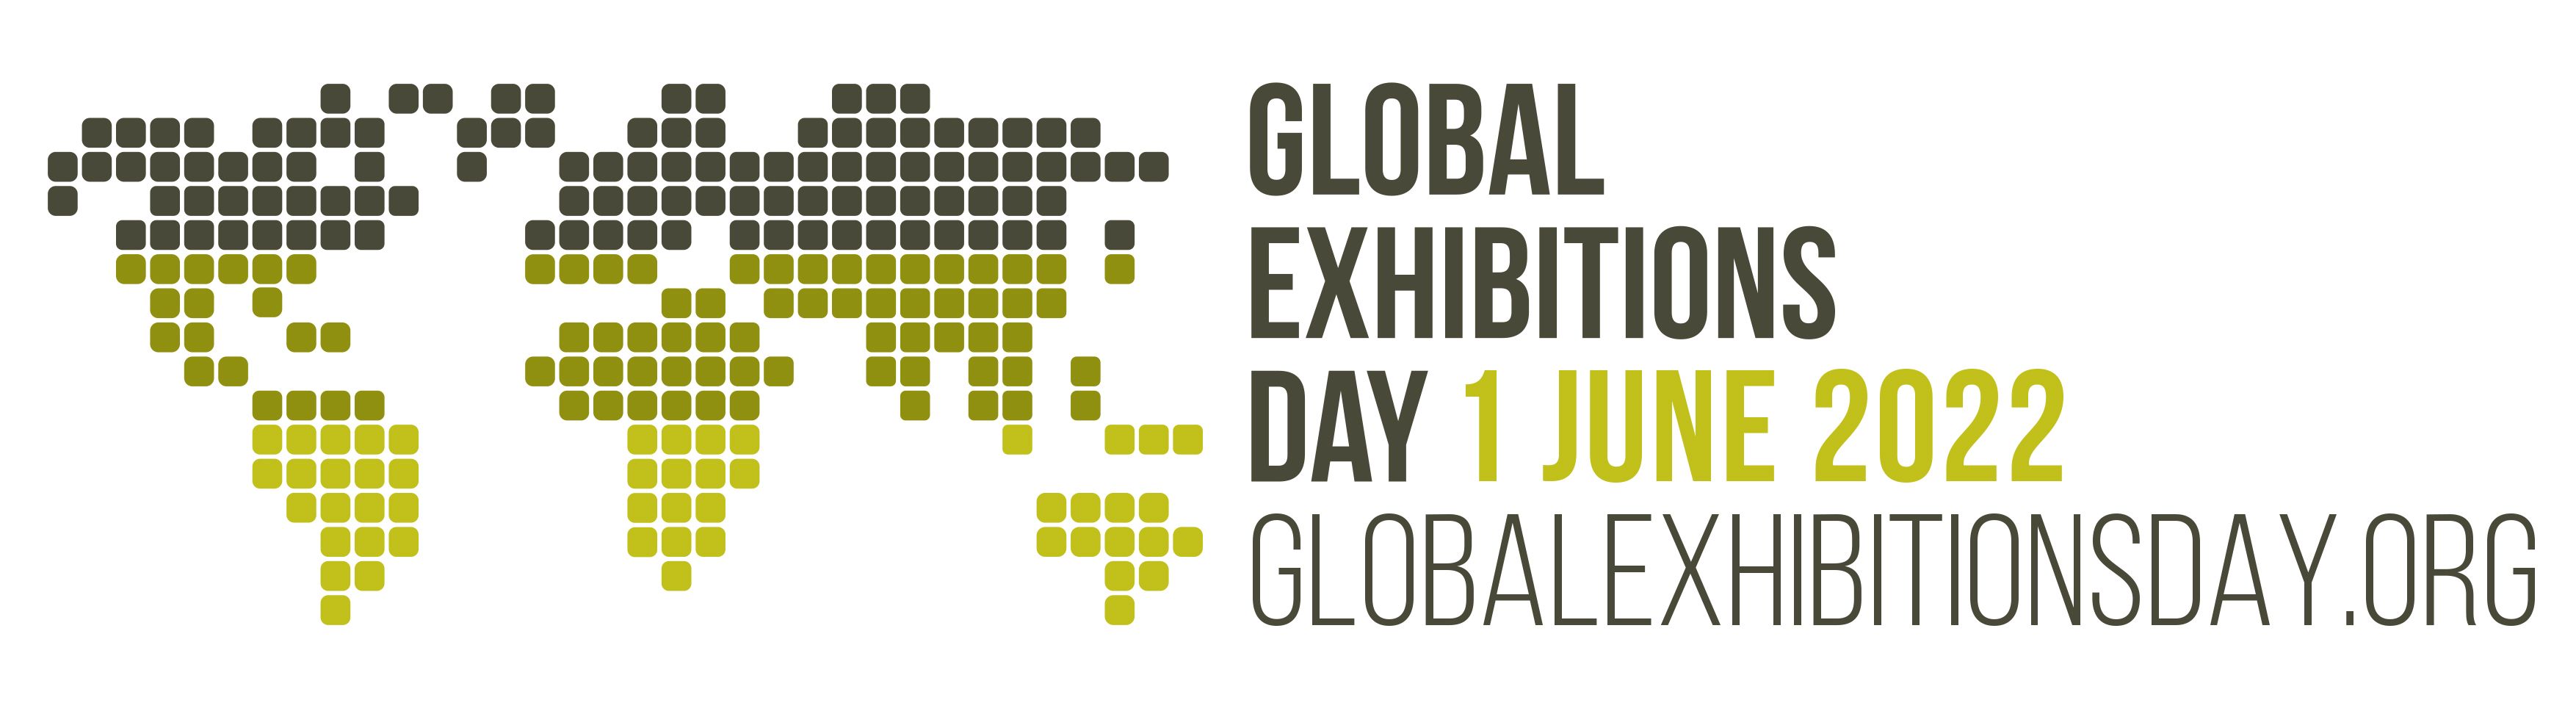 Global exhibitions day